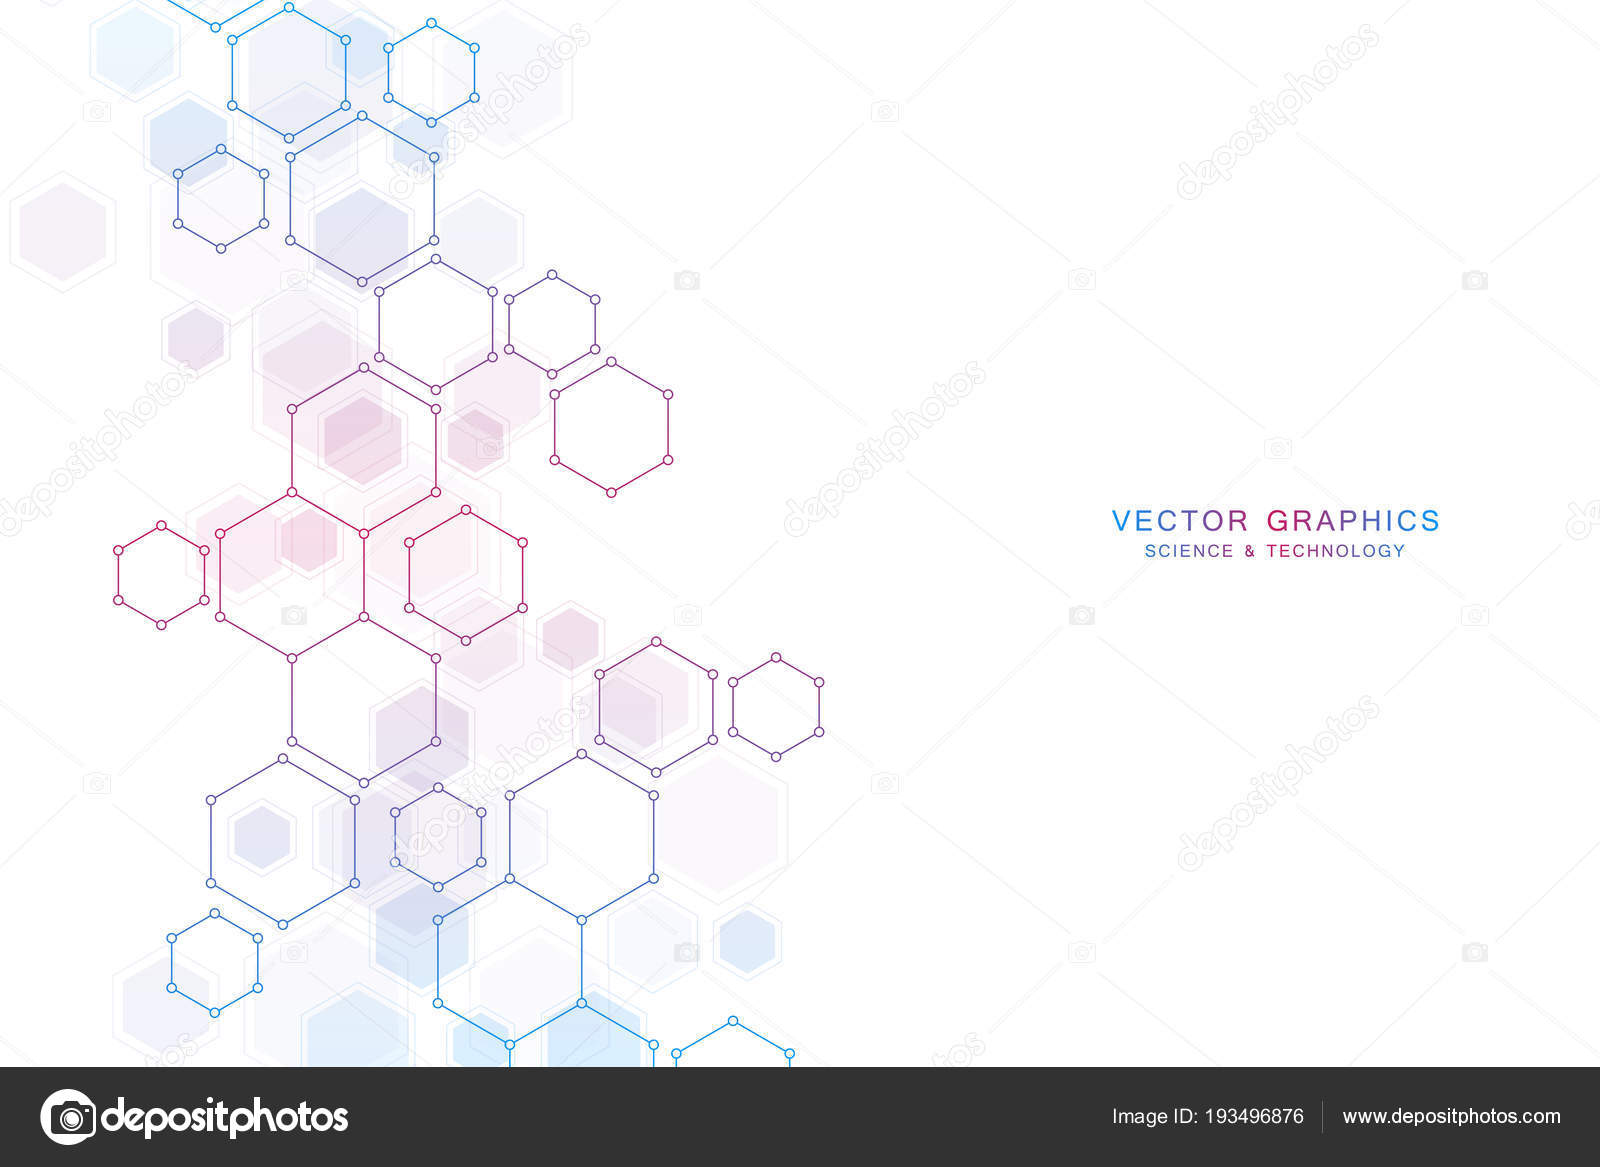 Abstract science background with hexagons and molecules. ⬇ Vector Image ...